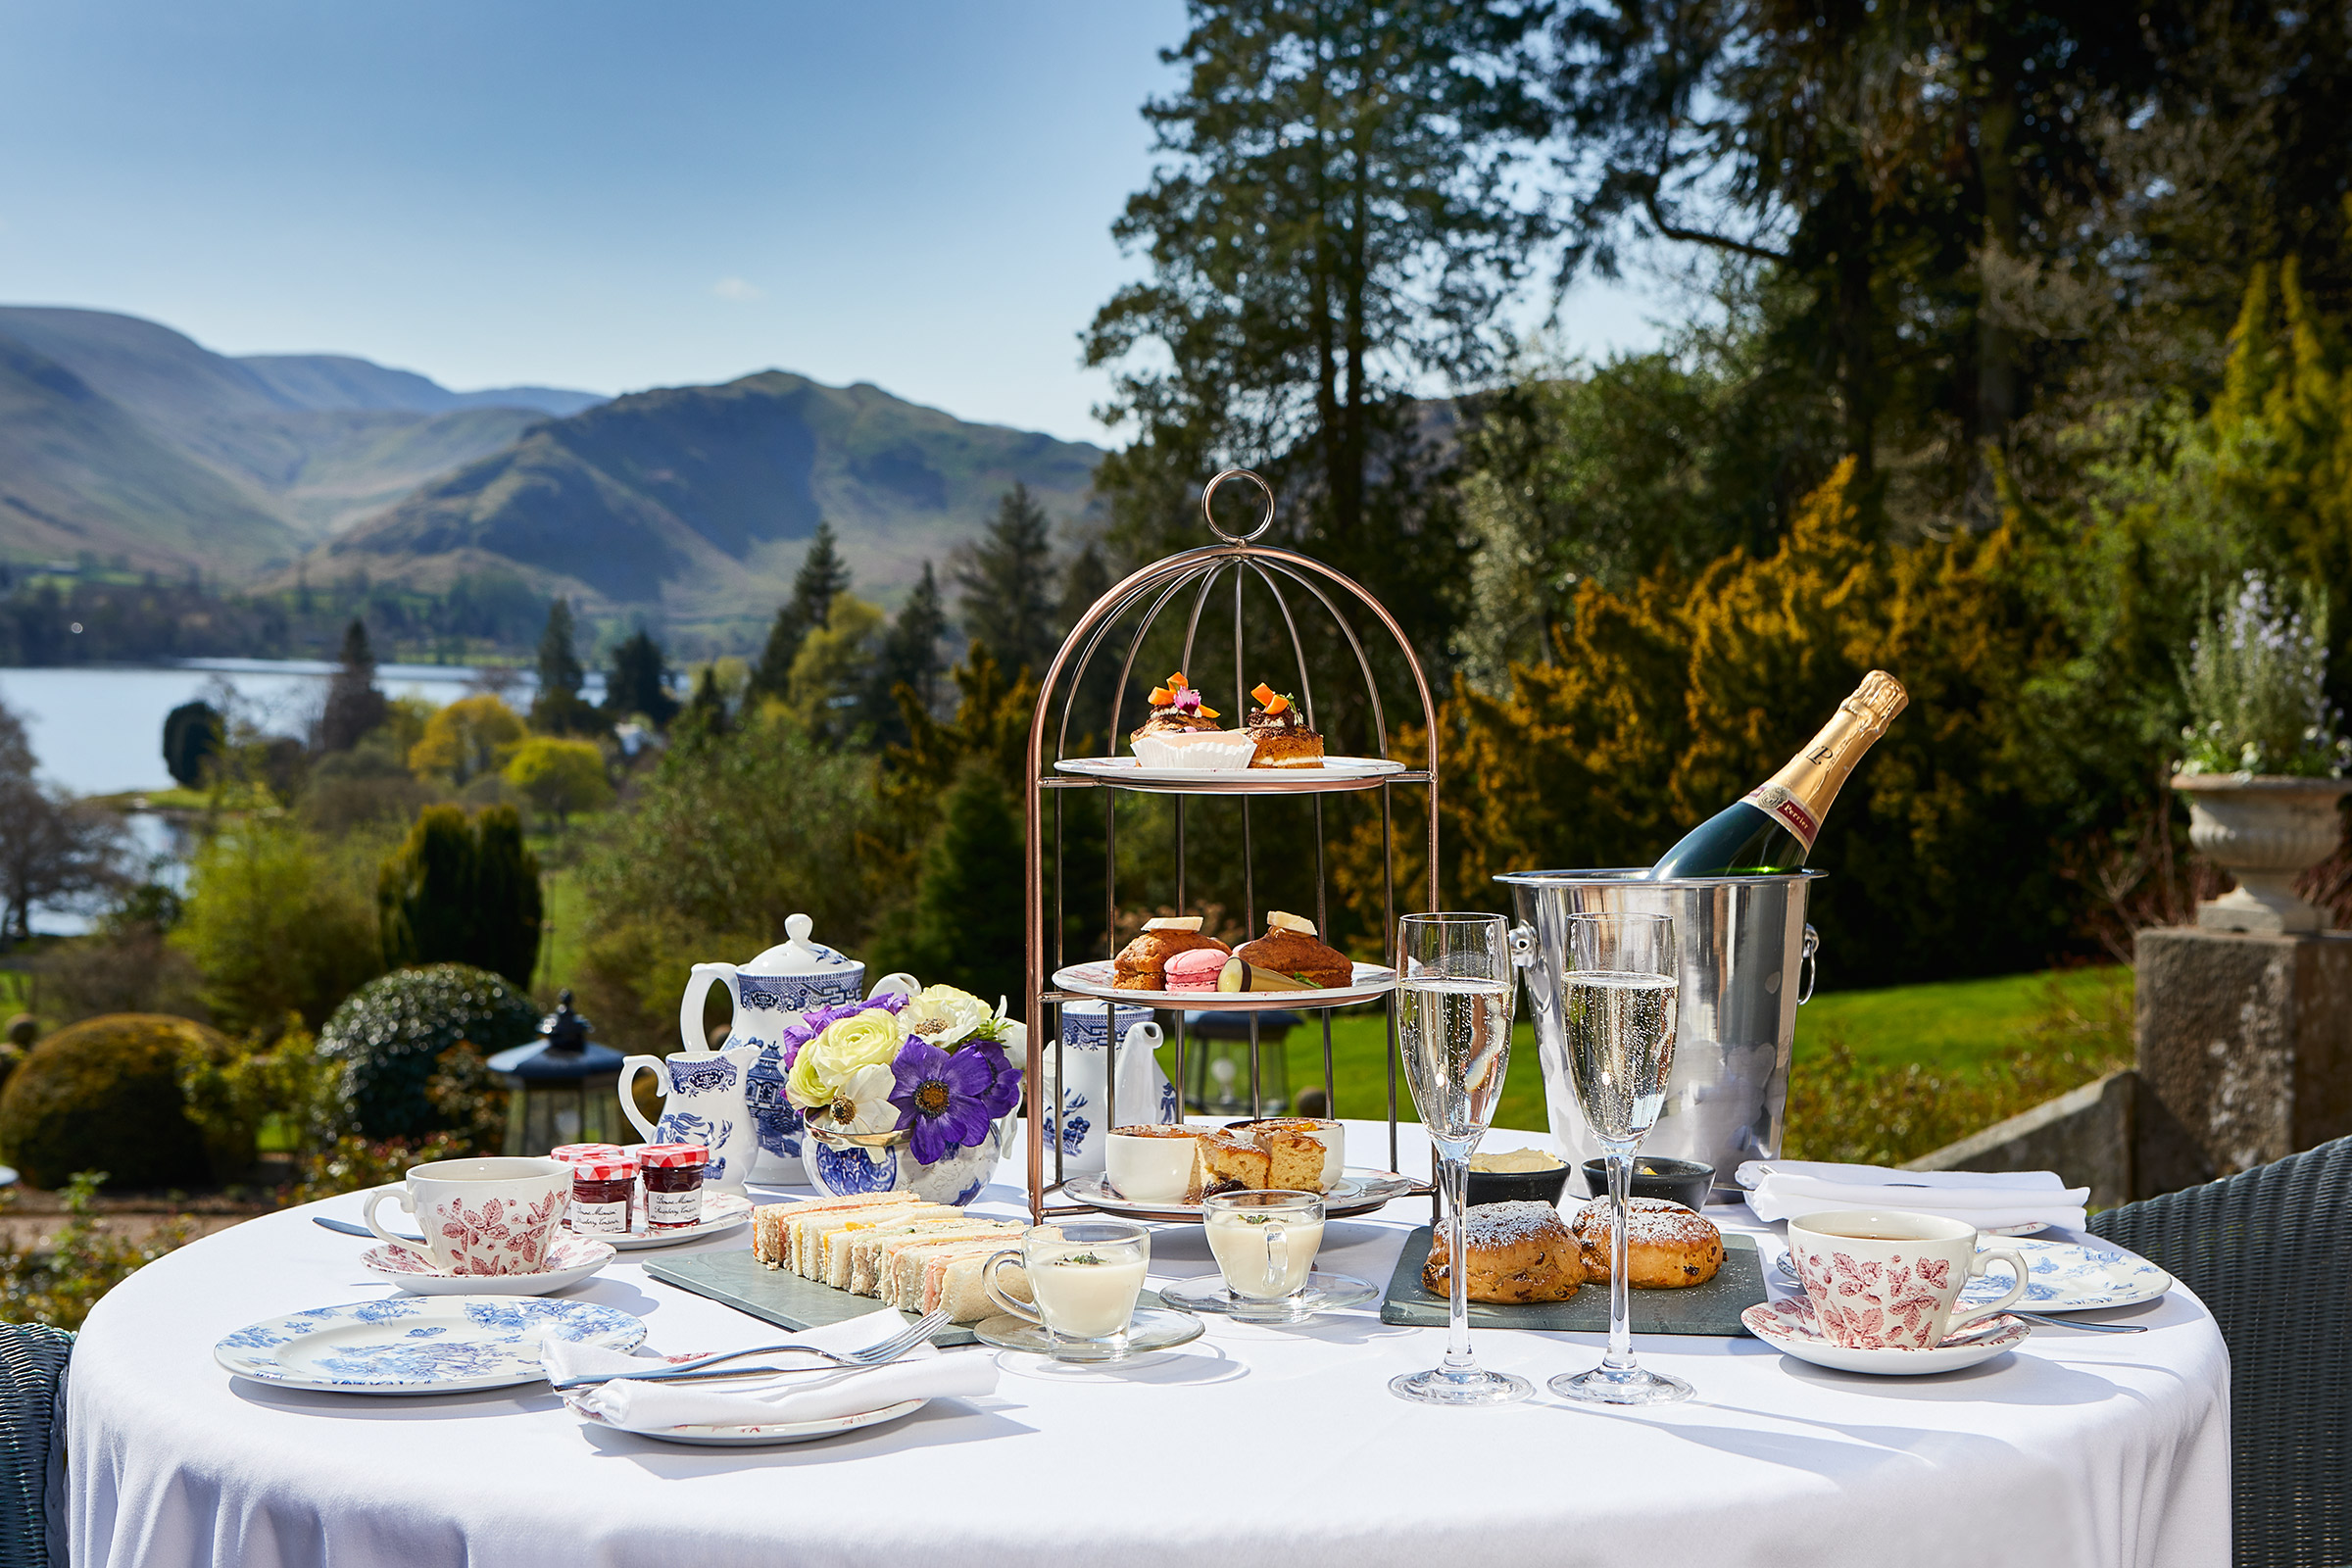 Leeming House Afternoon Tea.  Location food and drink photographer Alastair Ferrier